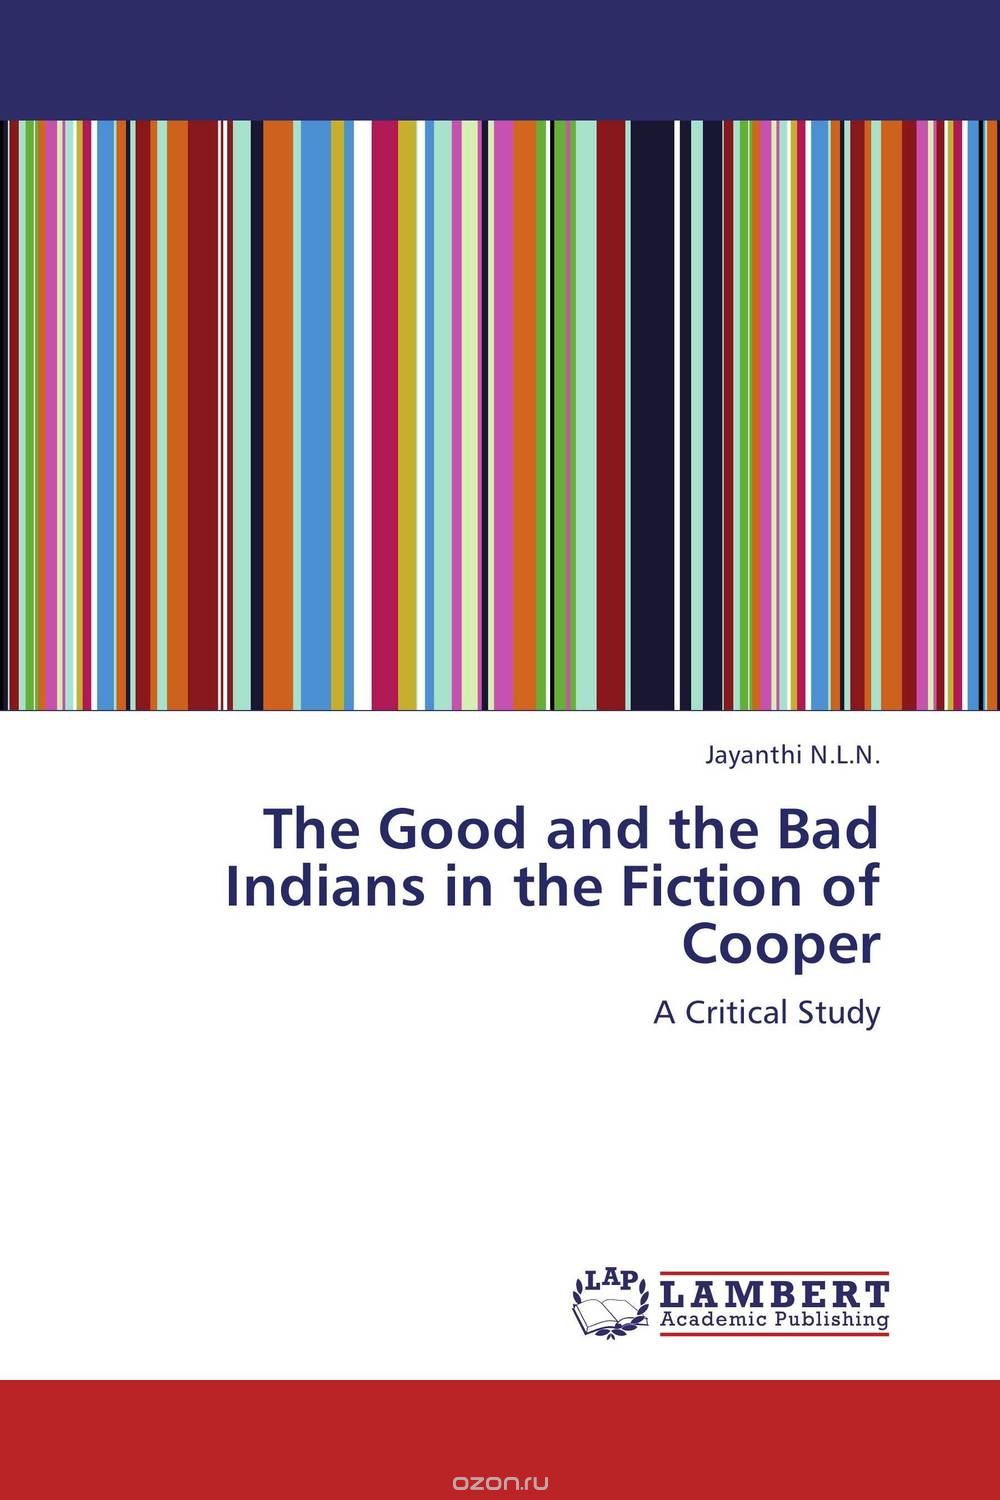 Скачать книгу "The Good and the Bad Indians in the Fiction of Cooper"